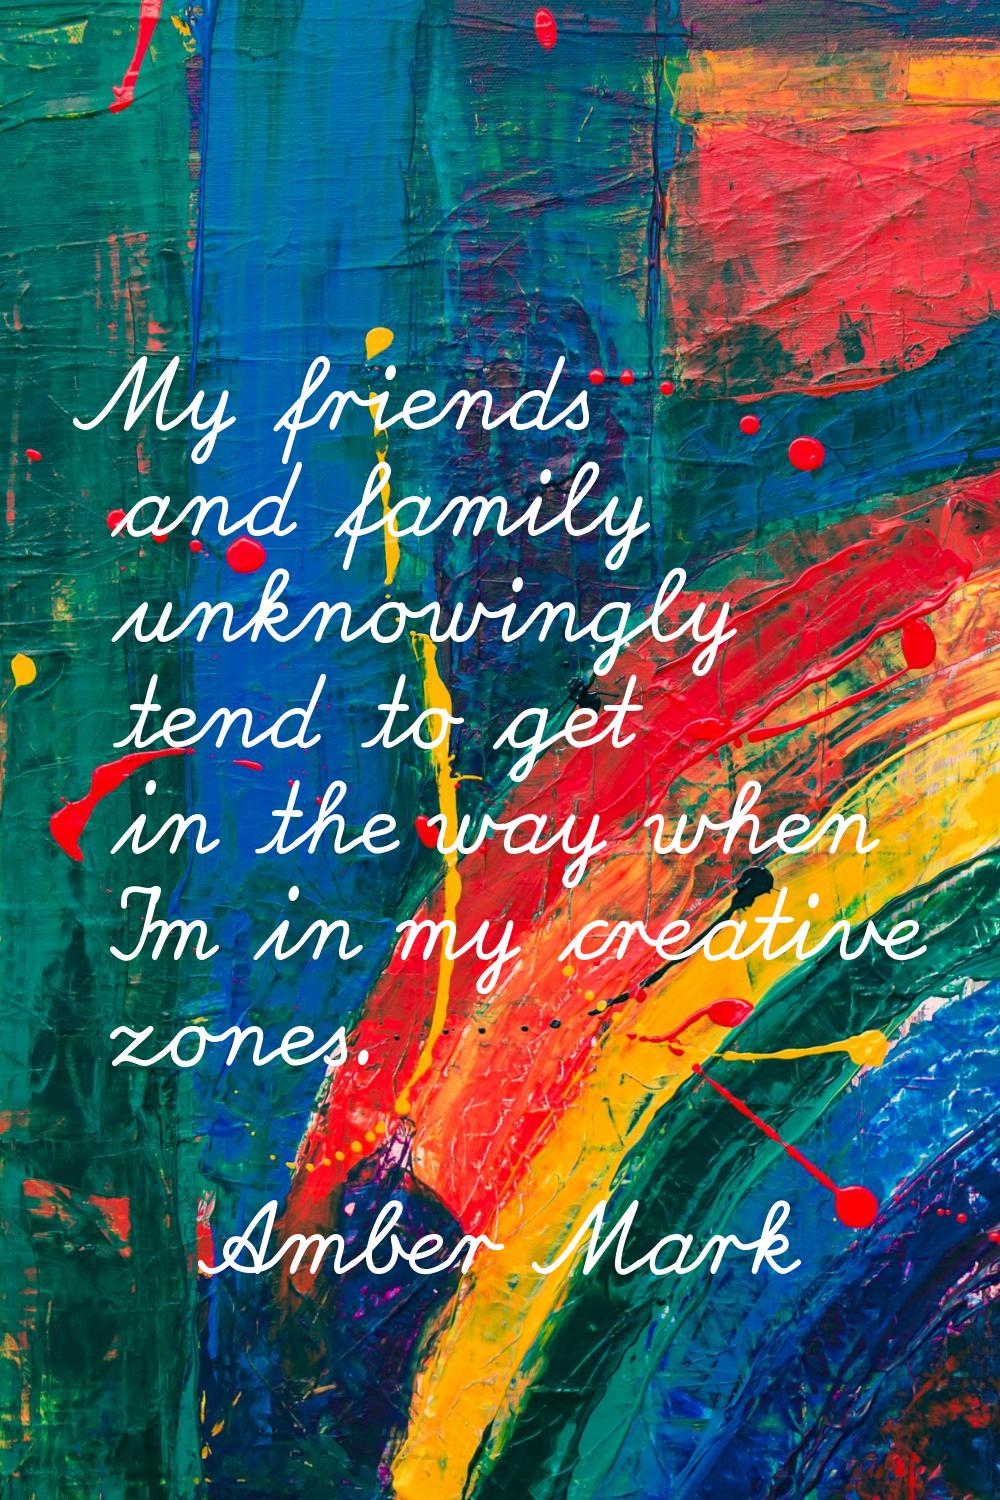 My friends and family unknowingly tend to get in the way when I'm in my creative zones.